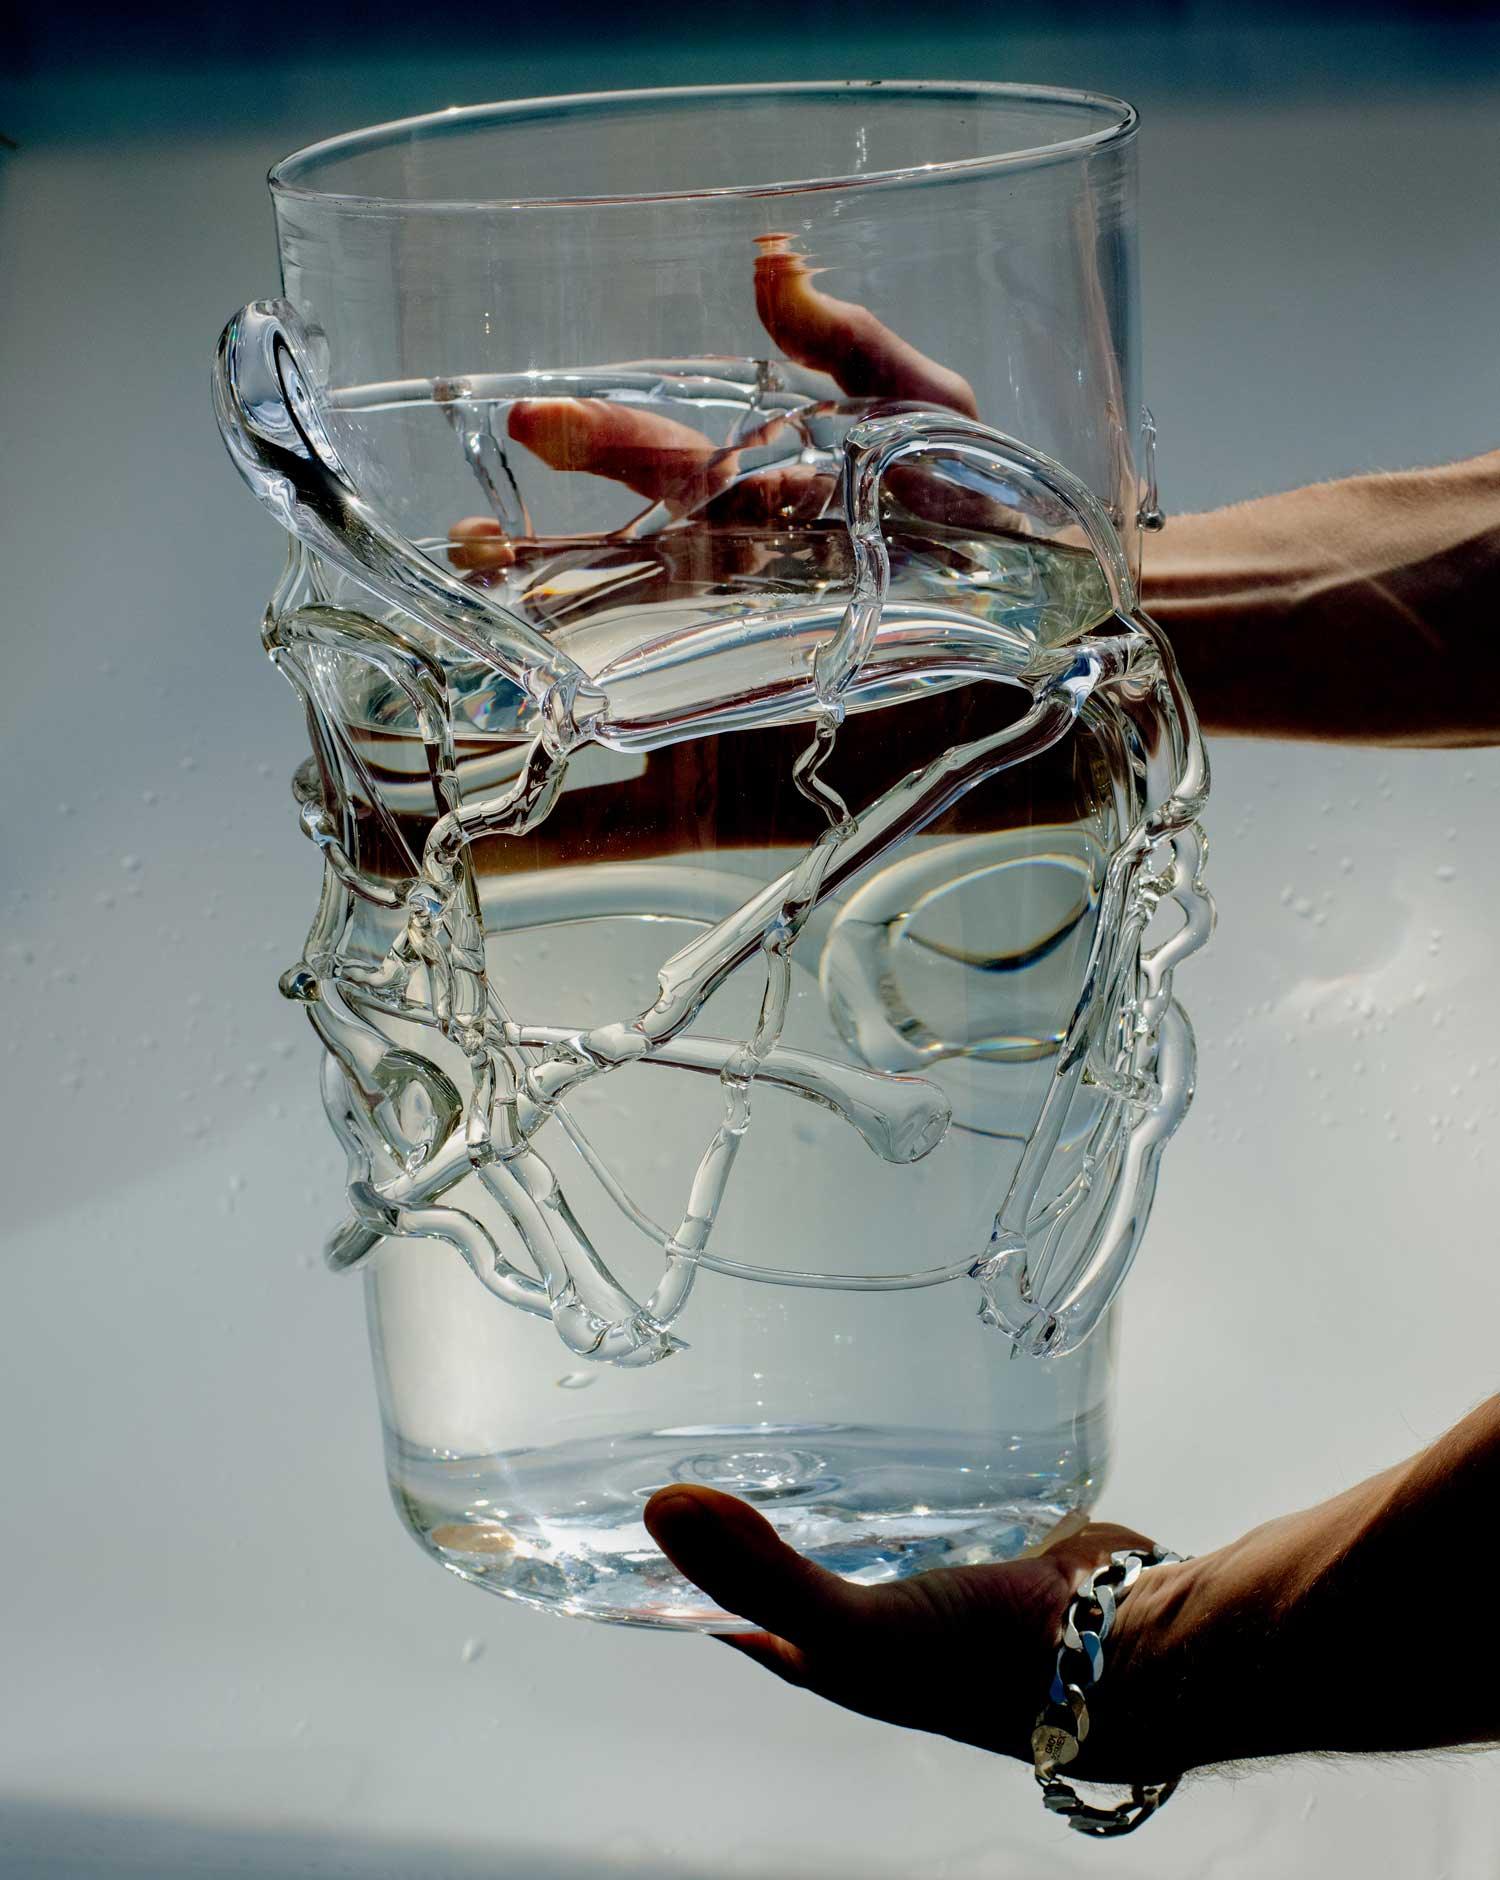 Hands holding a large vase with melted glass details white background.